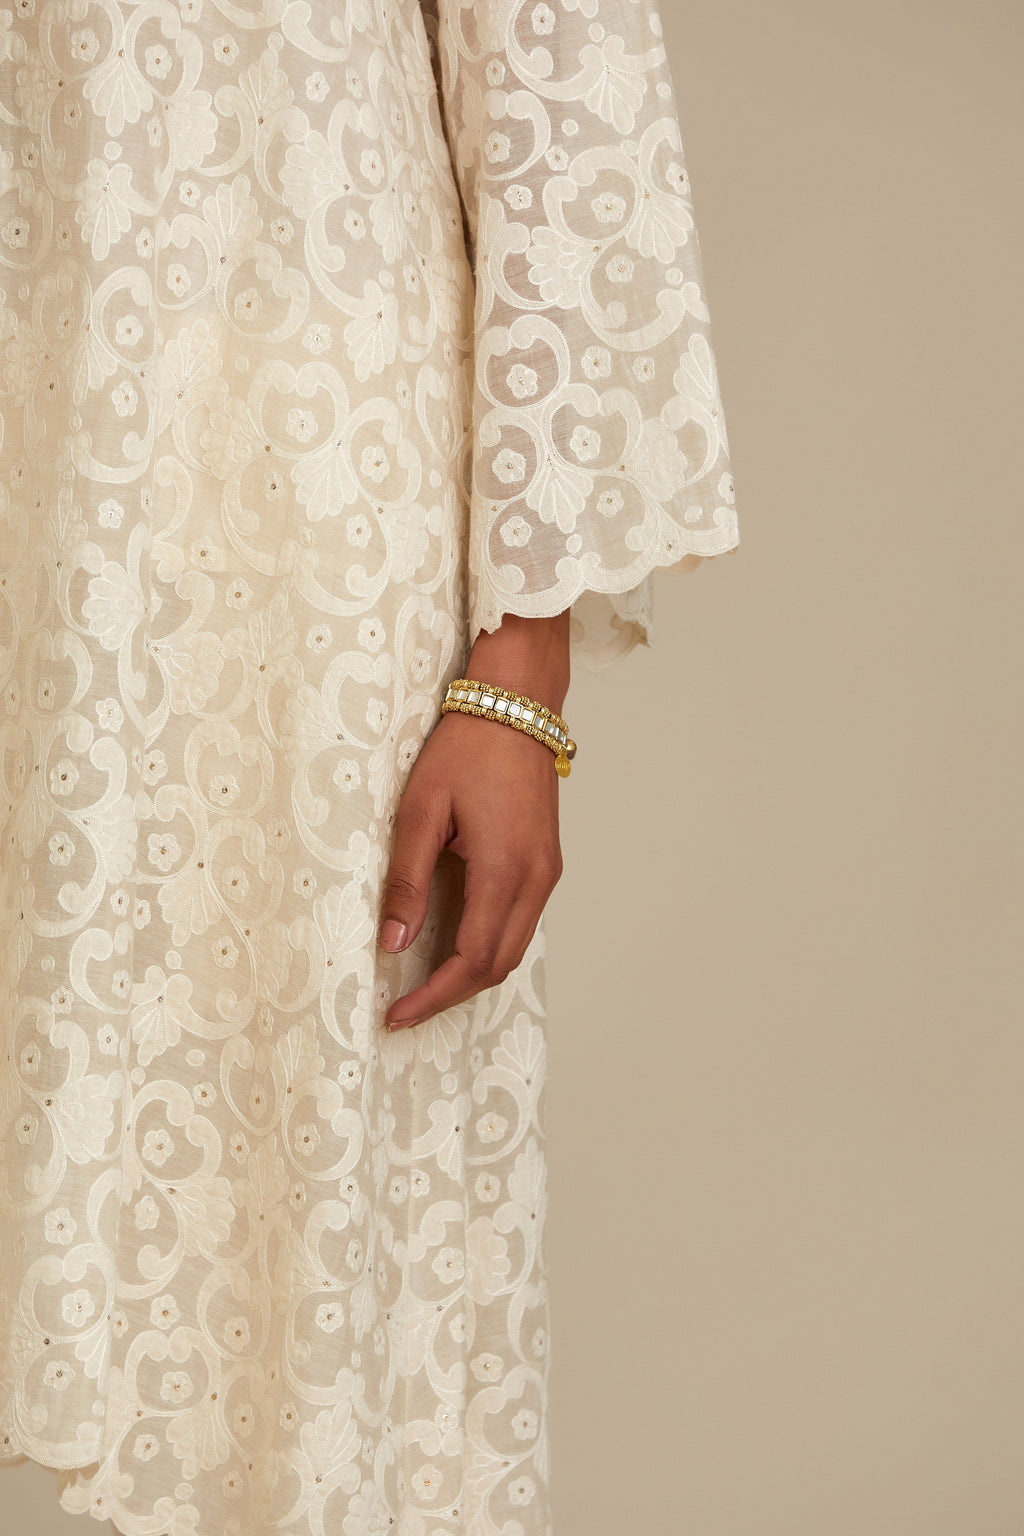 Off white short easy fit, straight hem kurta set with all-over trellis jaal appliqué, highlighted with sequins.